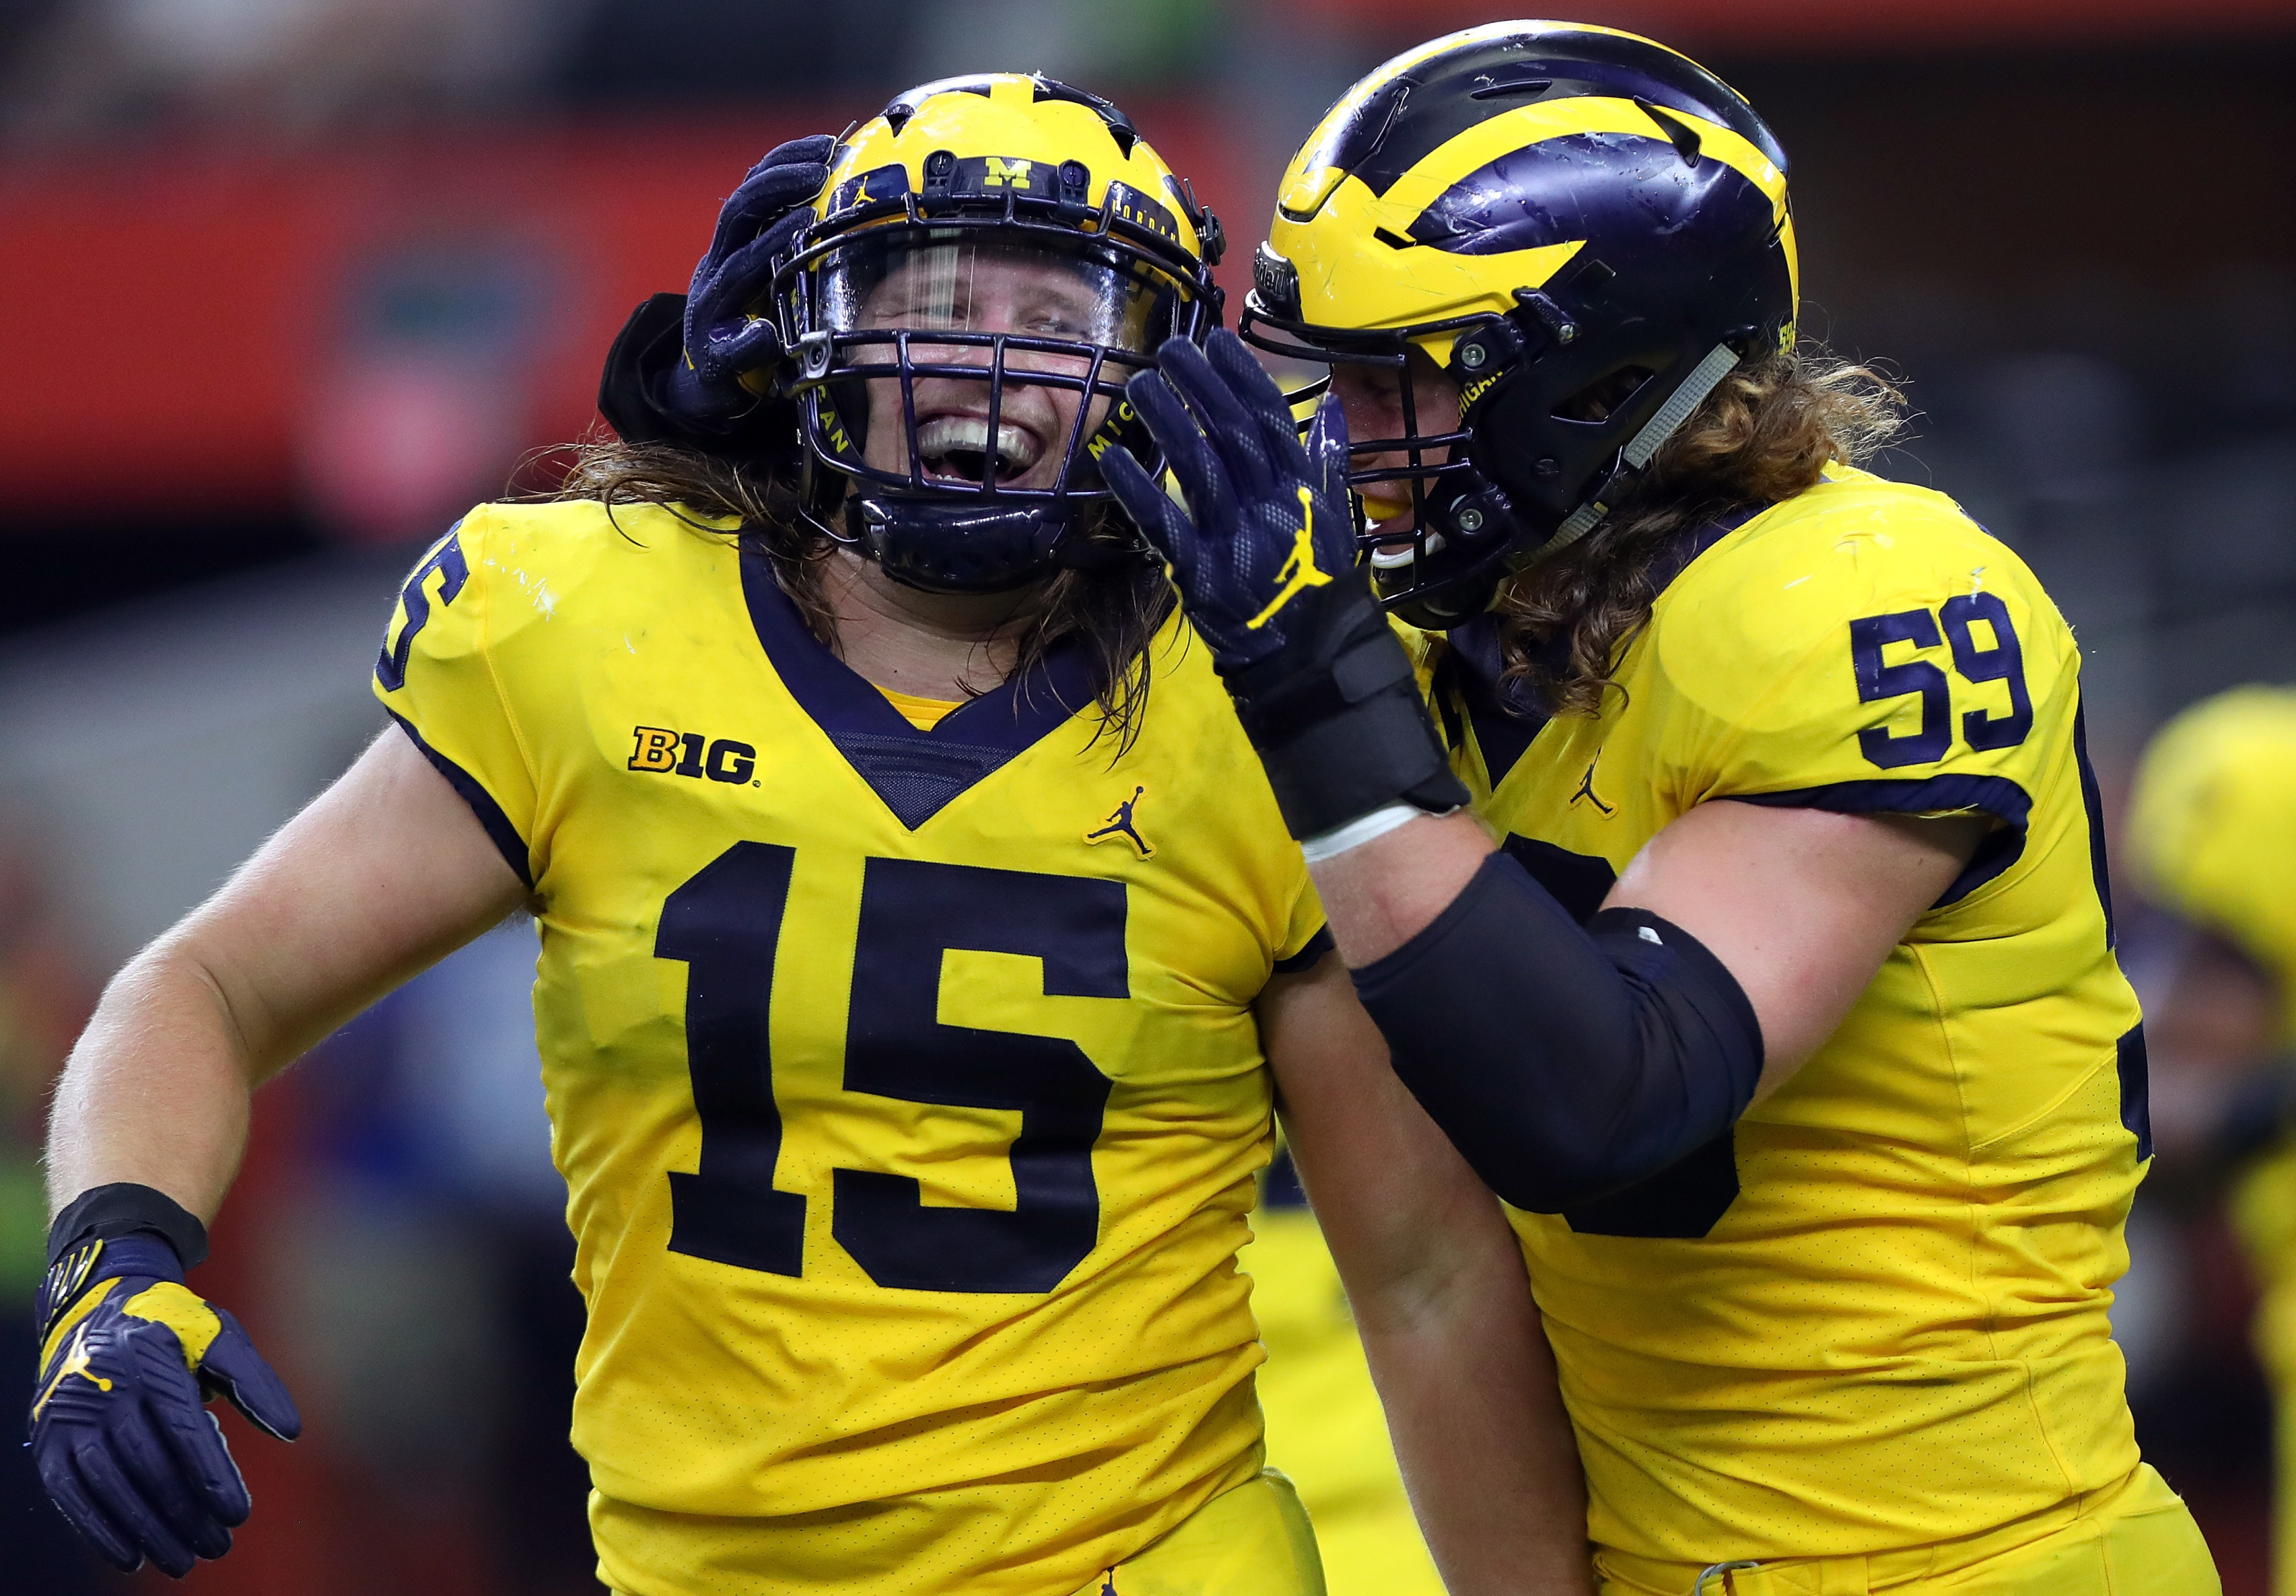 Another New Michigan Football Uniform Combo? - Sports Illustrated